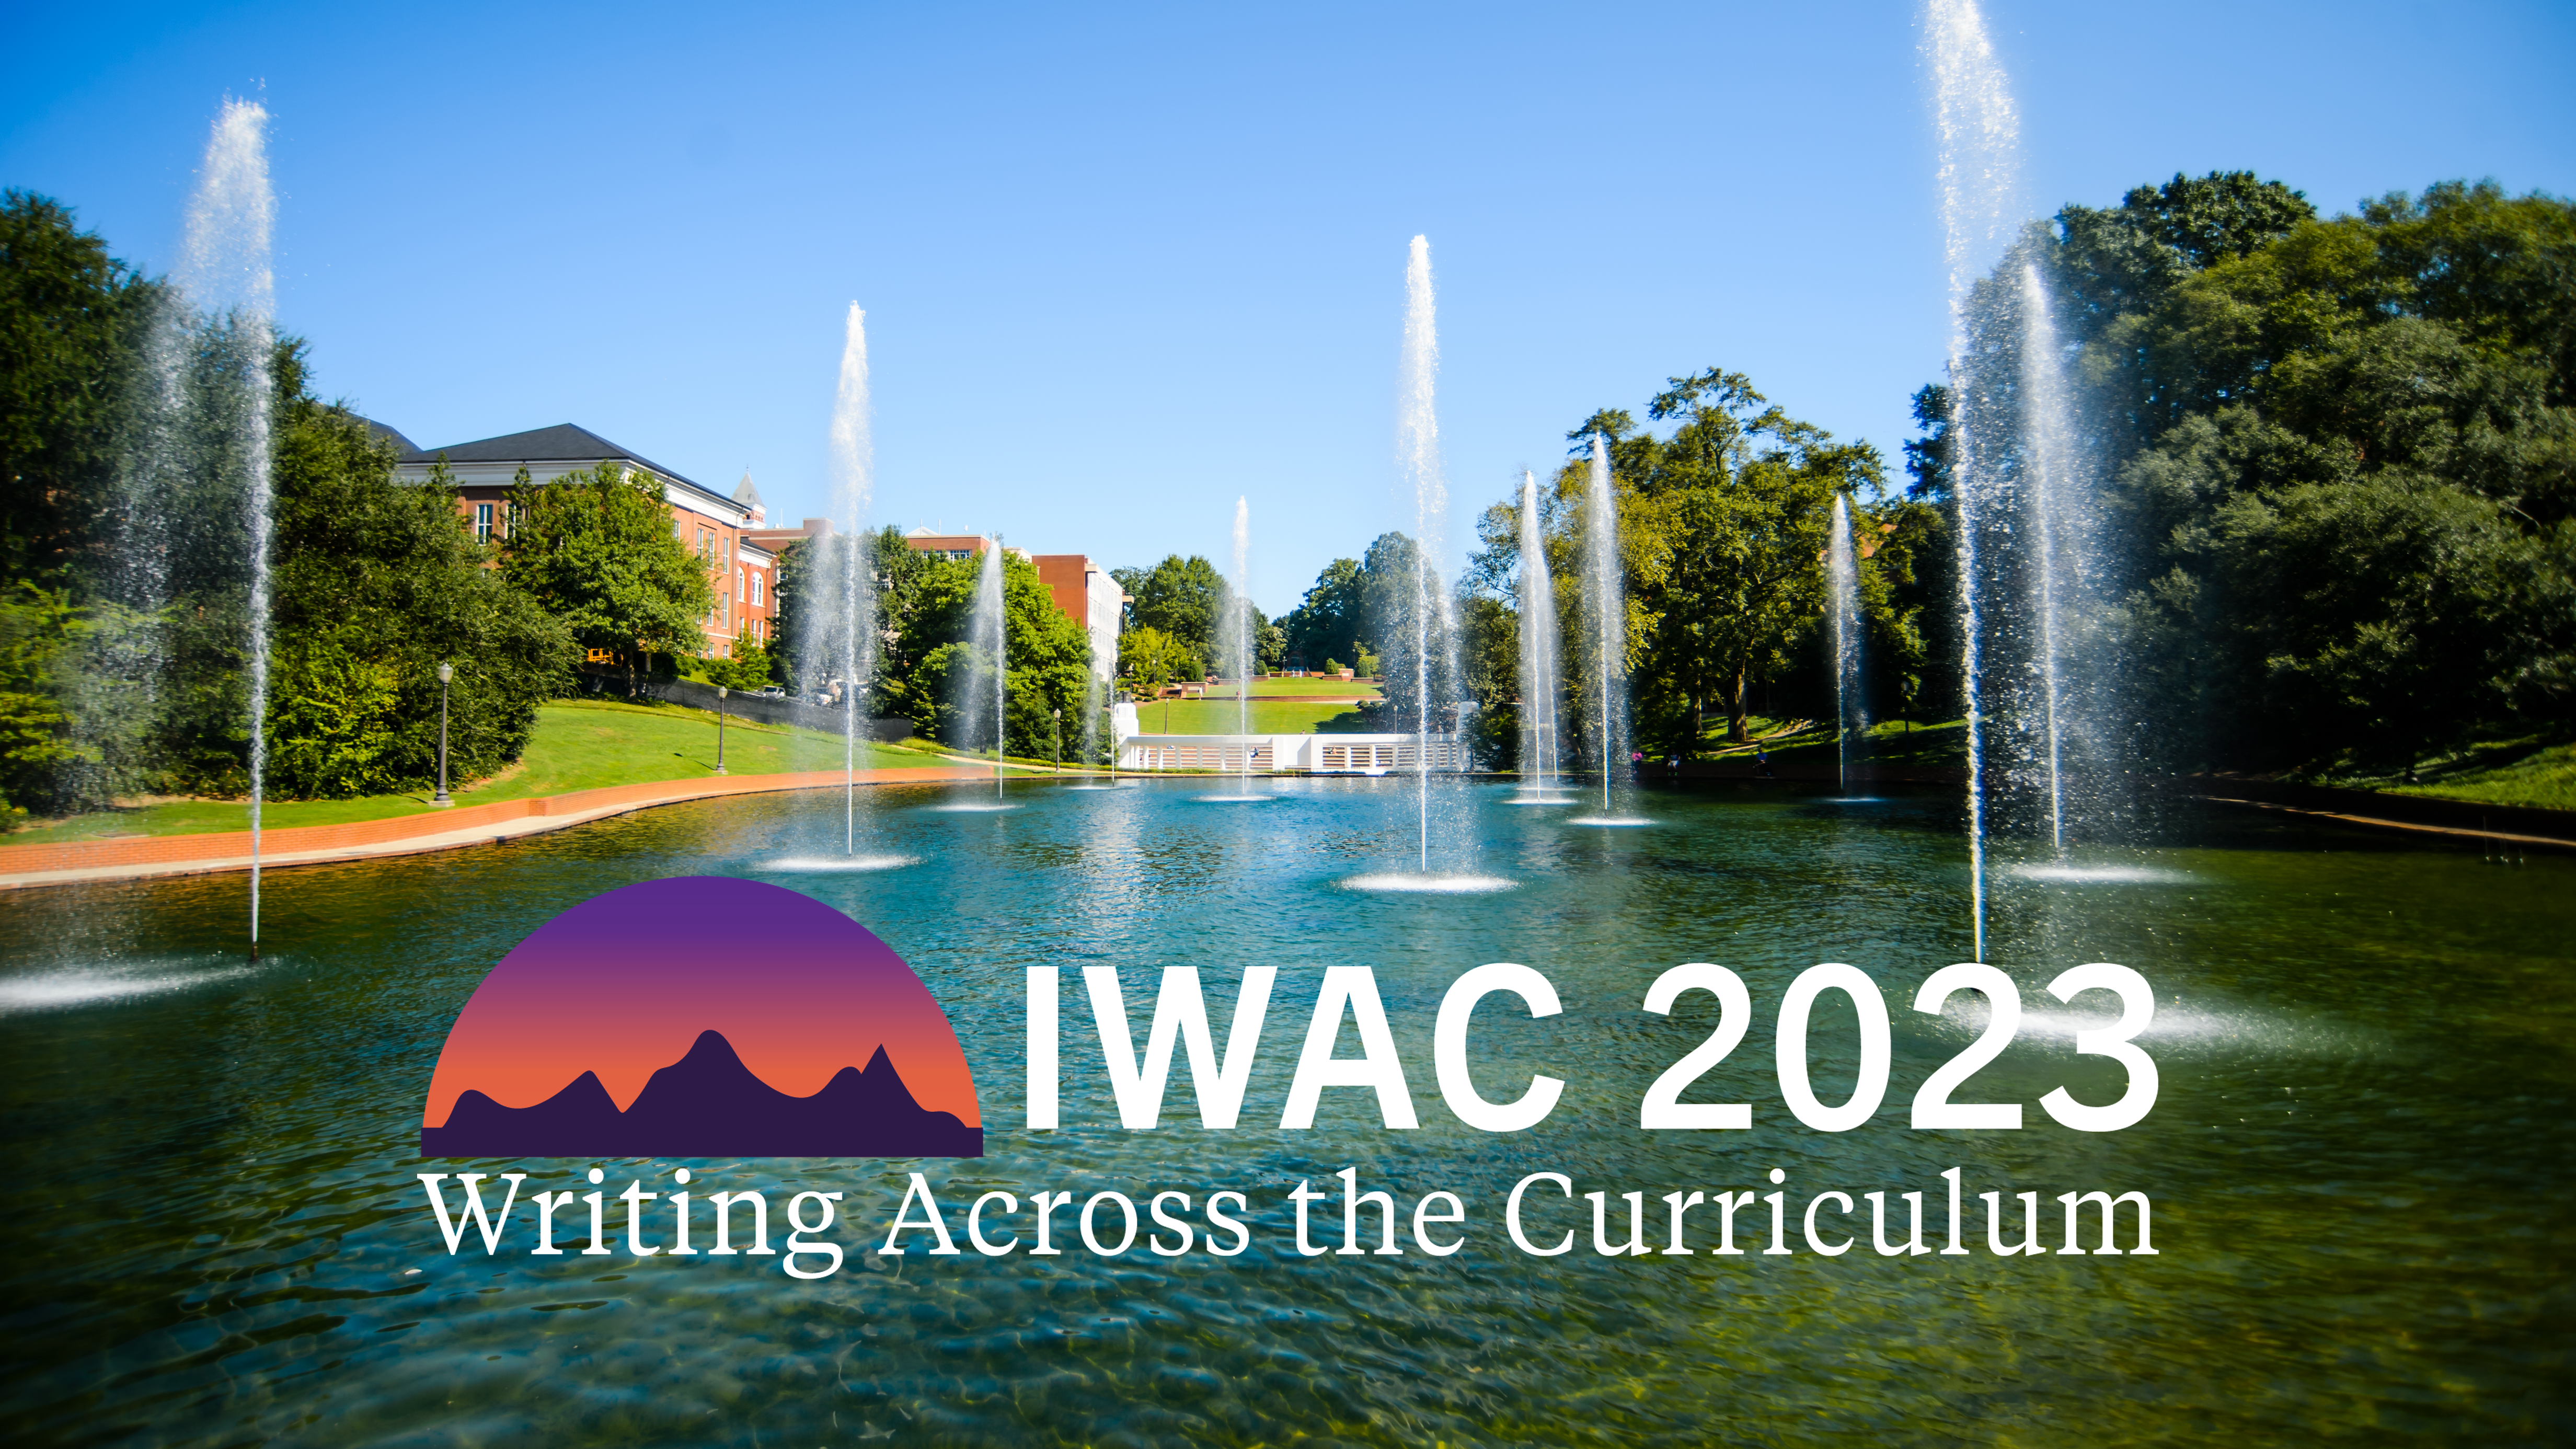 International Writing Across the Curriculum logo superimposed over an image of the reflecting pool on Clemson's campus